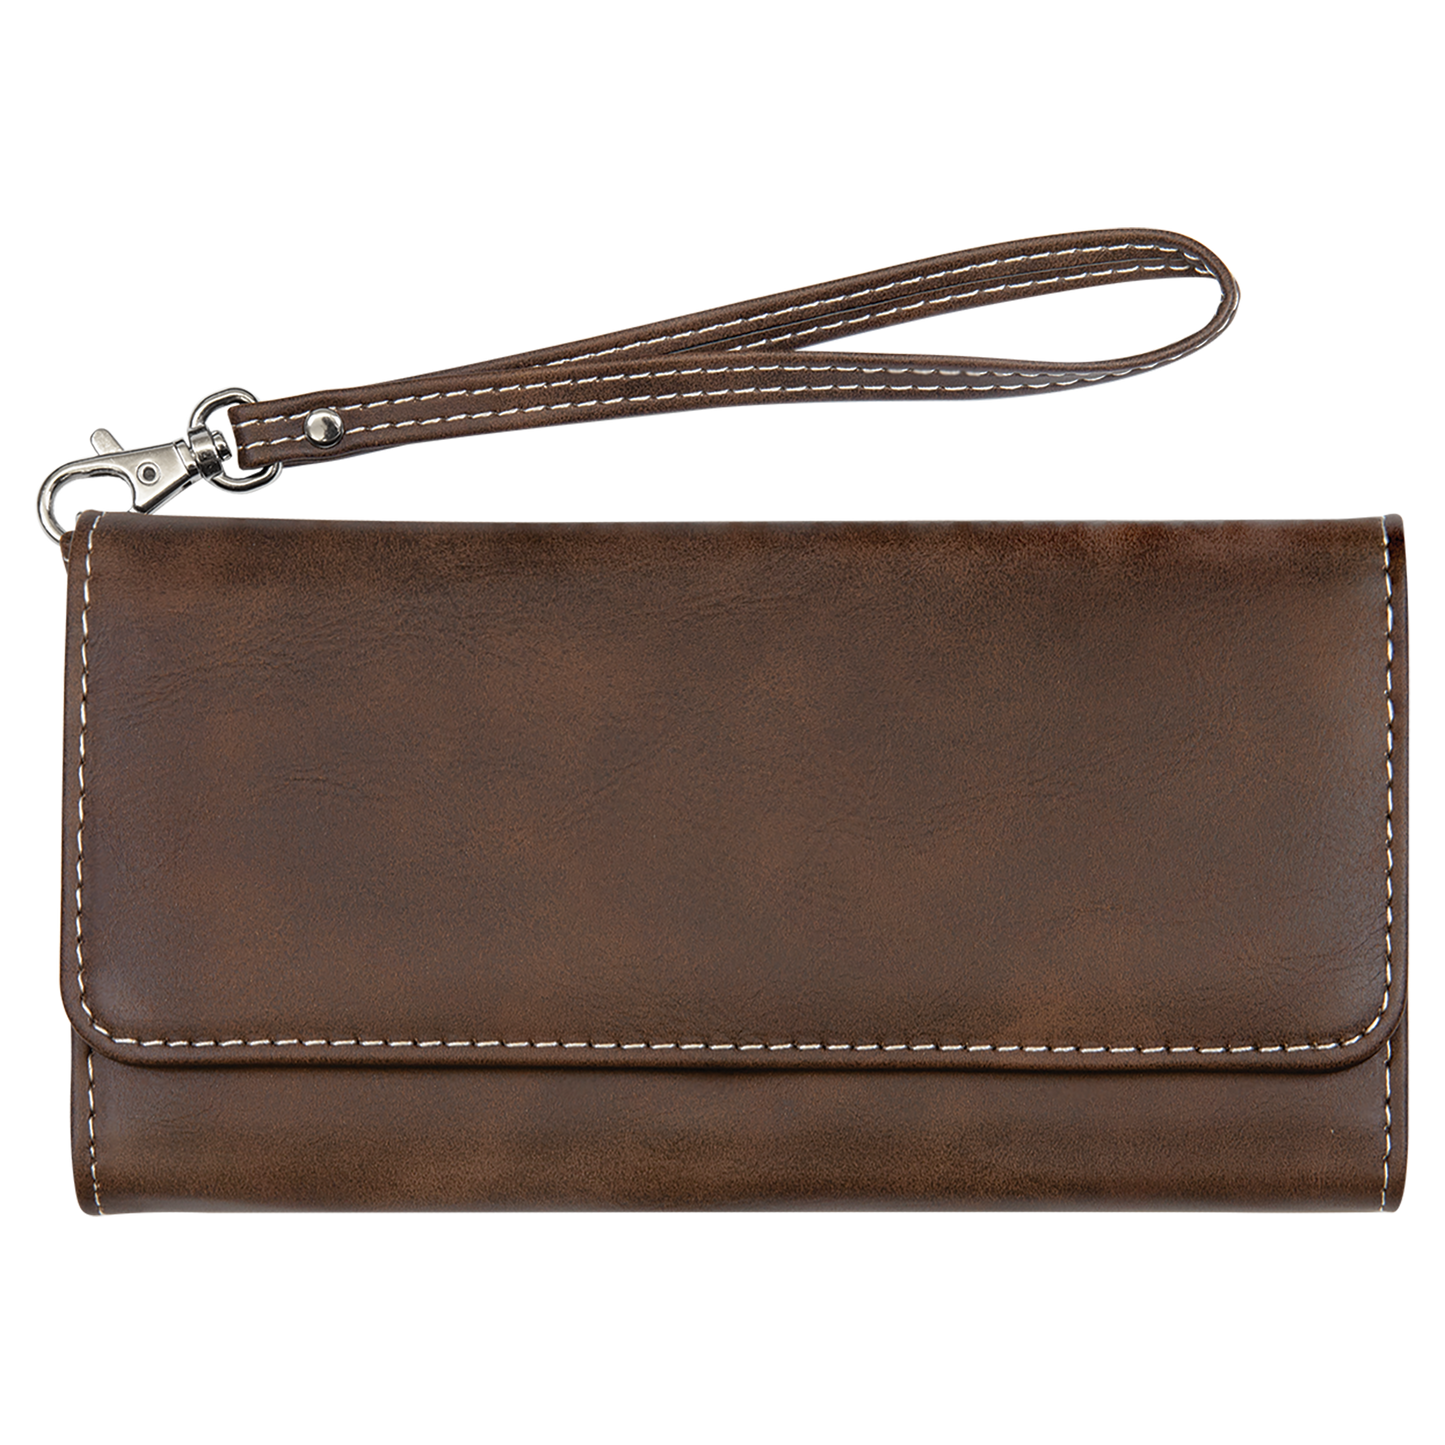 7 1/2" x 4" Rustic/Silver Leatherette Wallet with Strap